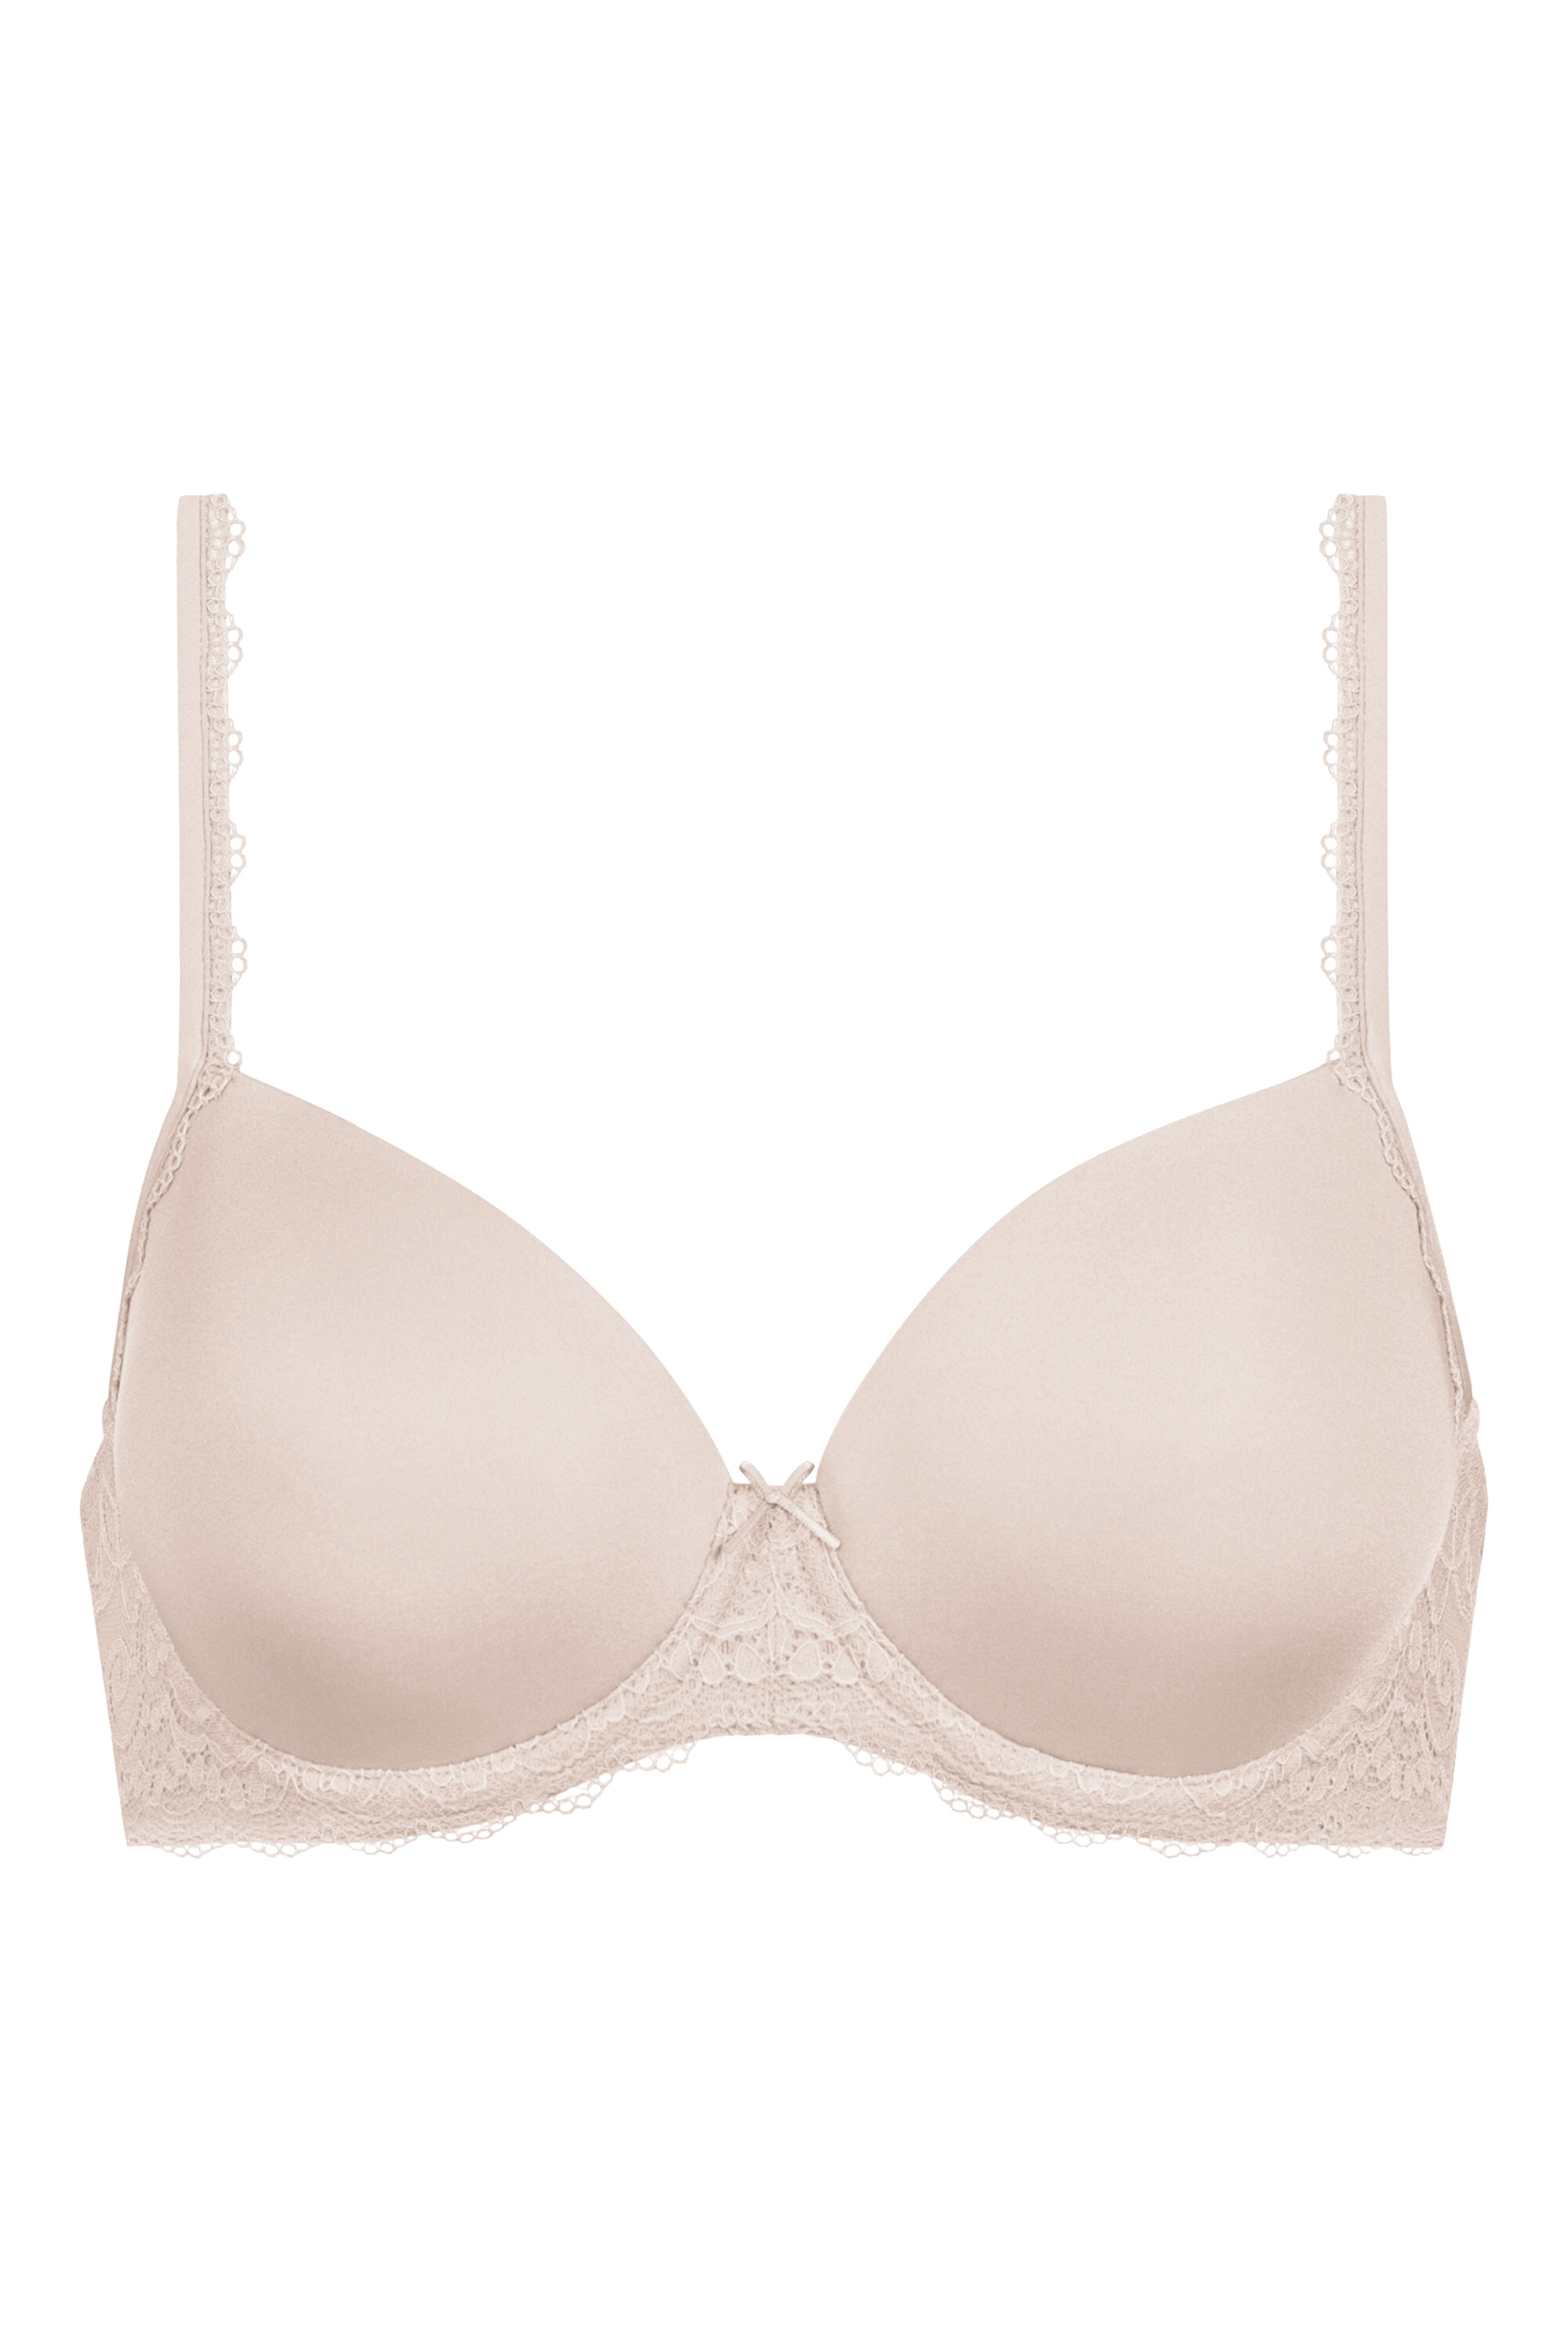 Cupbeha Bailey Serie Amorous Uitknippen | mey®